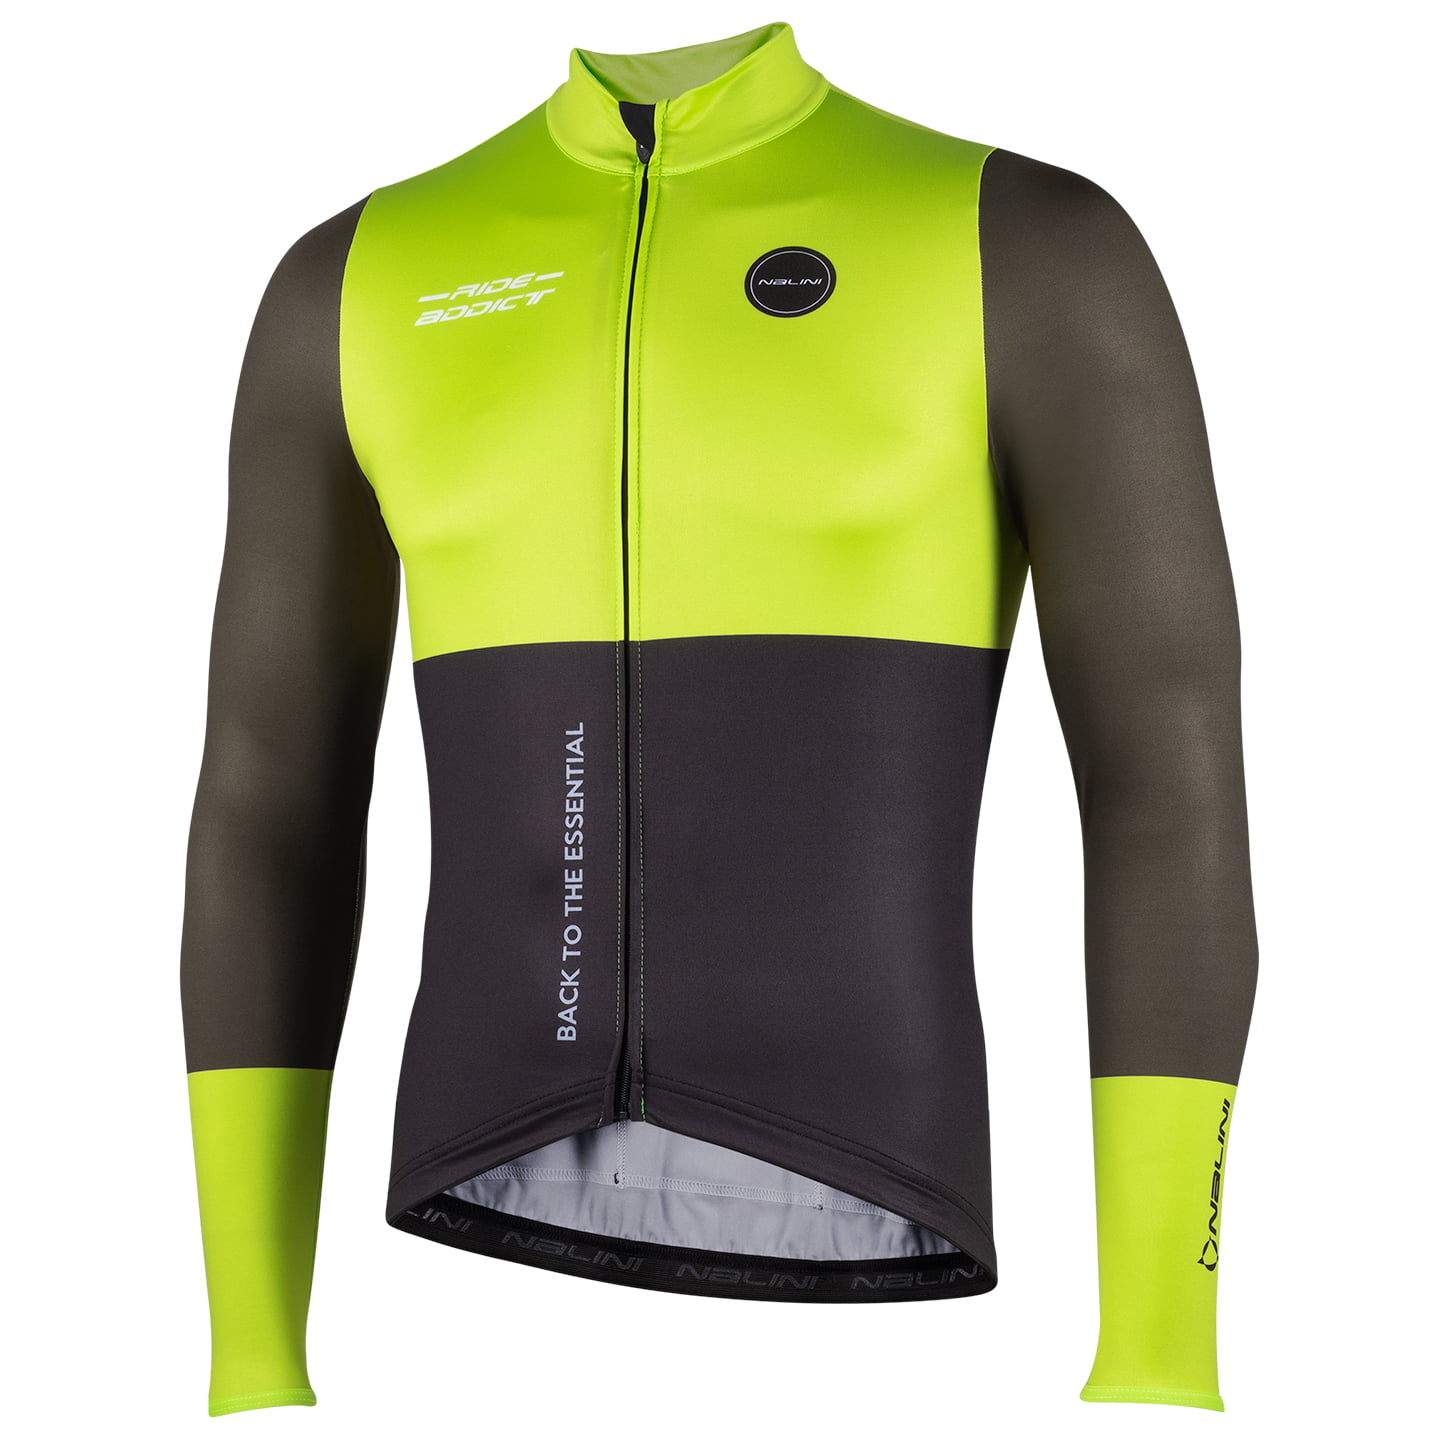 NALINI long sleeve jersey Warm Fit Long Sleeve Jersey, for men, size L, Cycling jersey, Cycling clothing